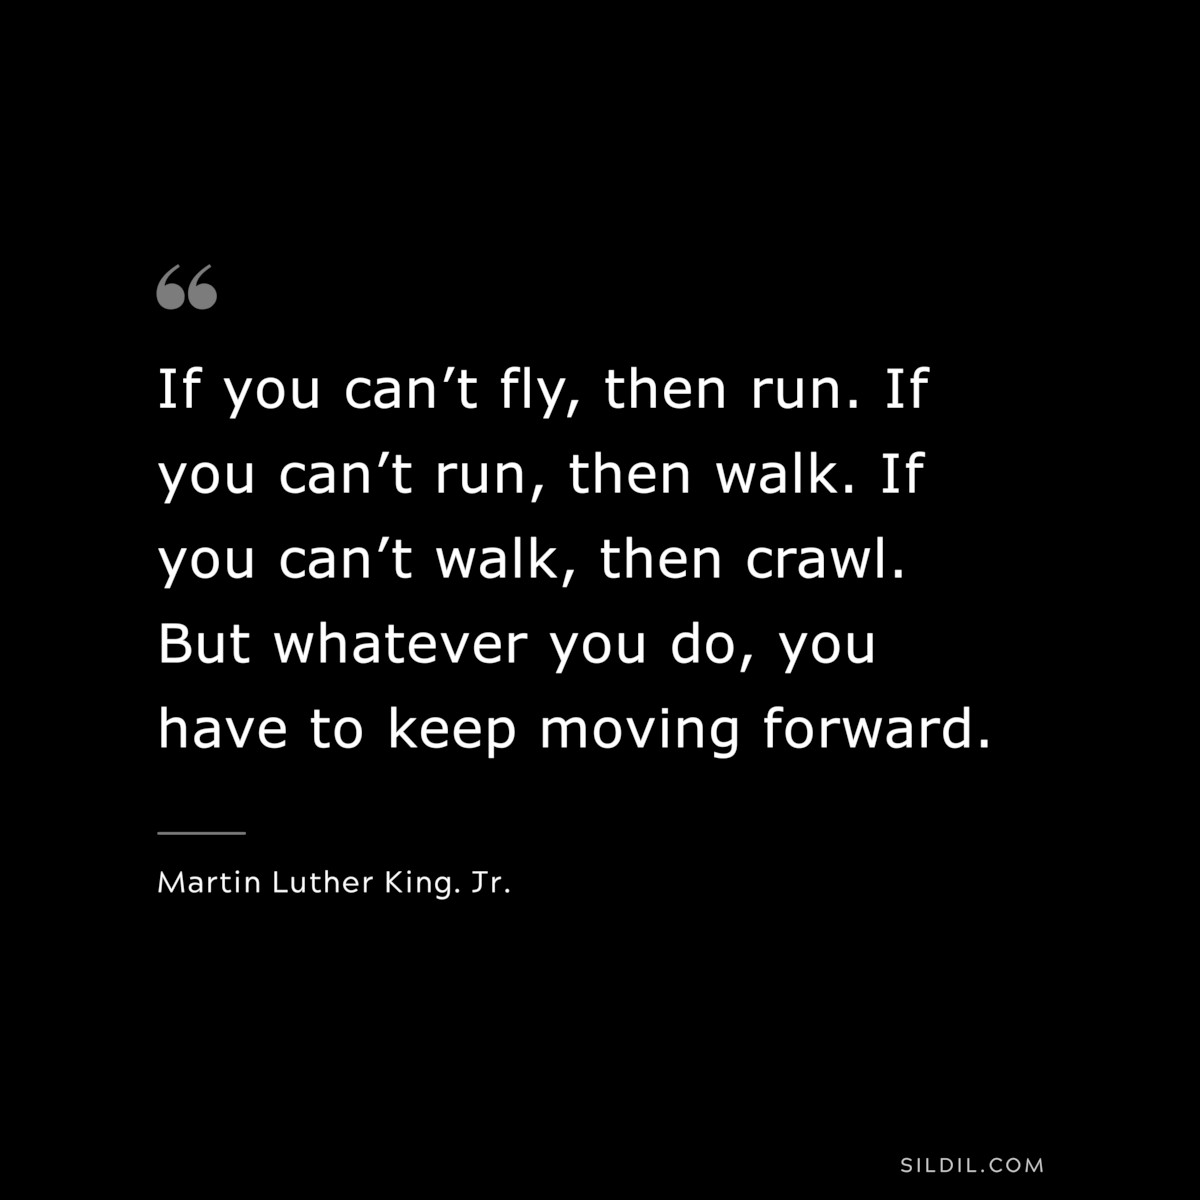 If you can’t fly, then run. If you can’t run, then walk. If you can’t walk, then crawl. But whatever you do, you have to keep moving forward. ― Martin Luther King. Jr.